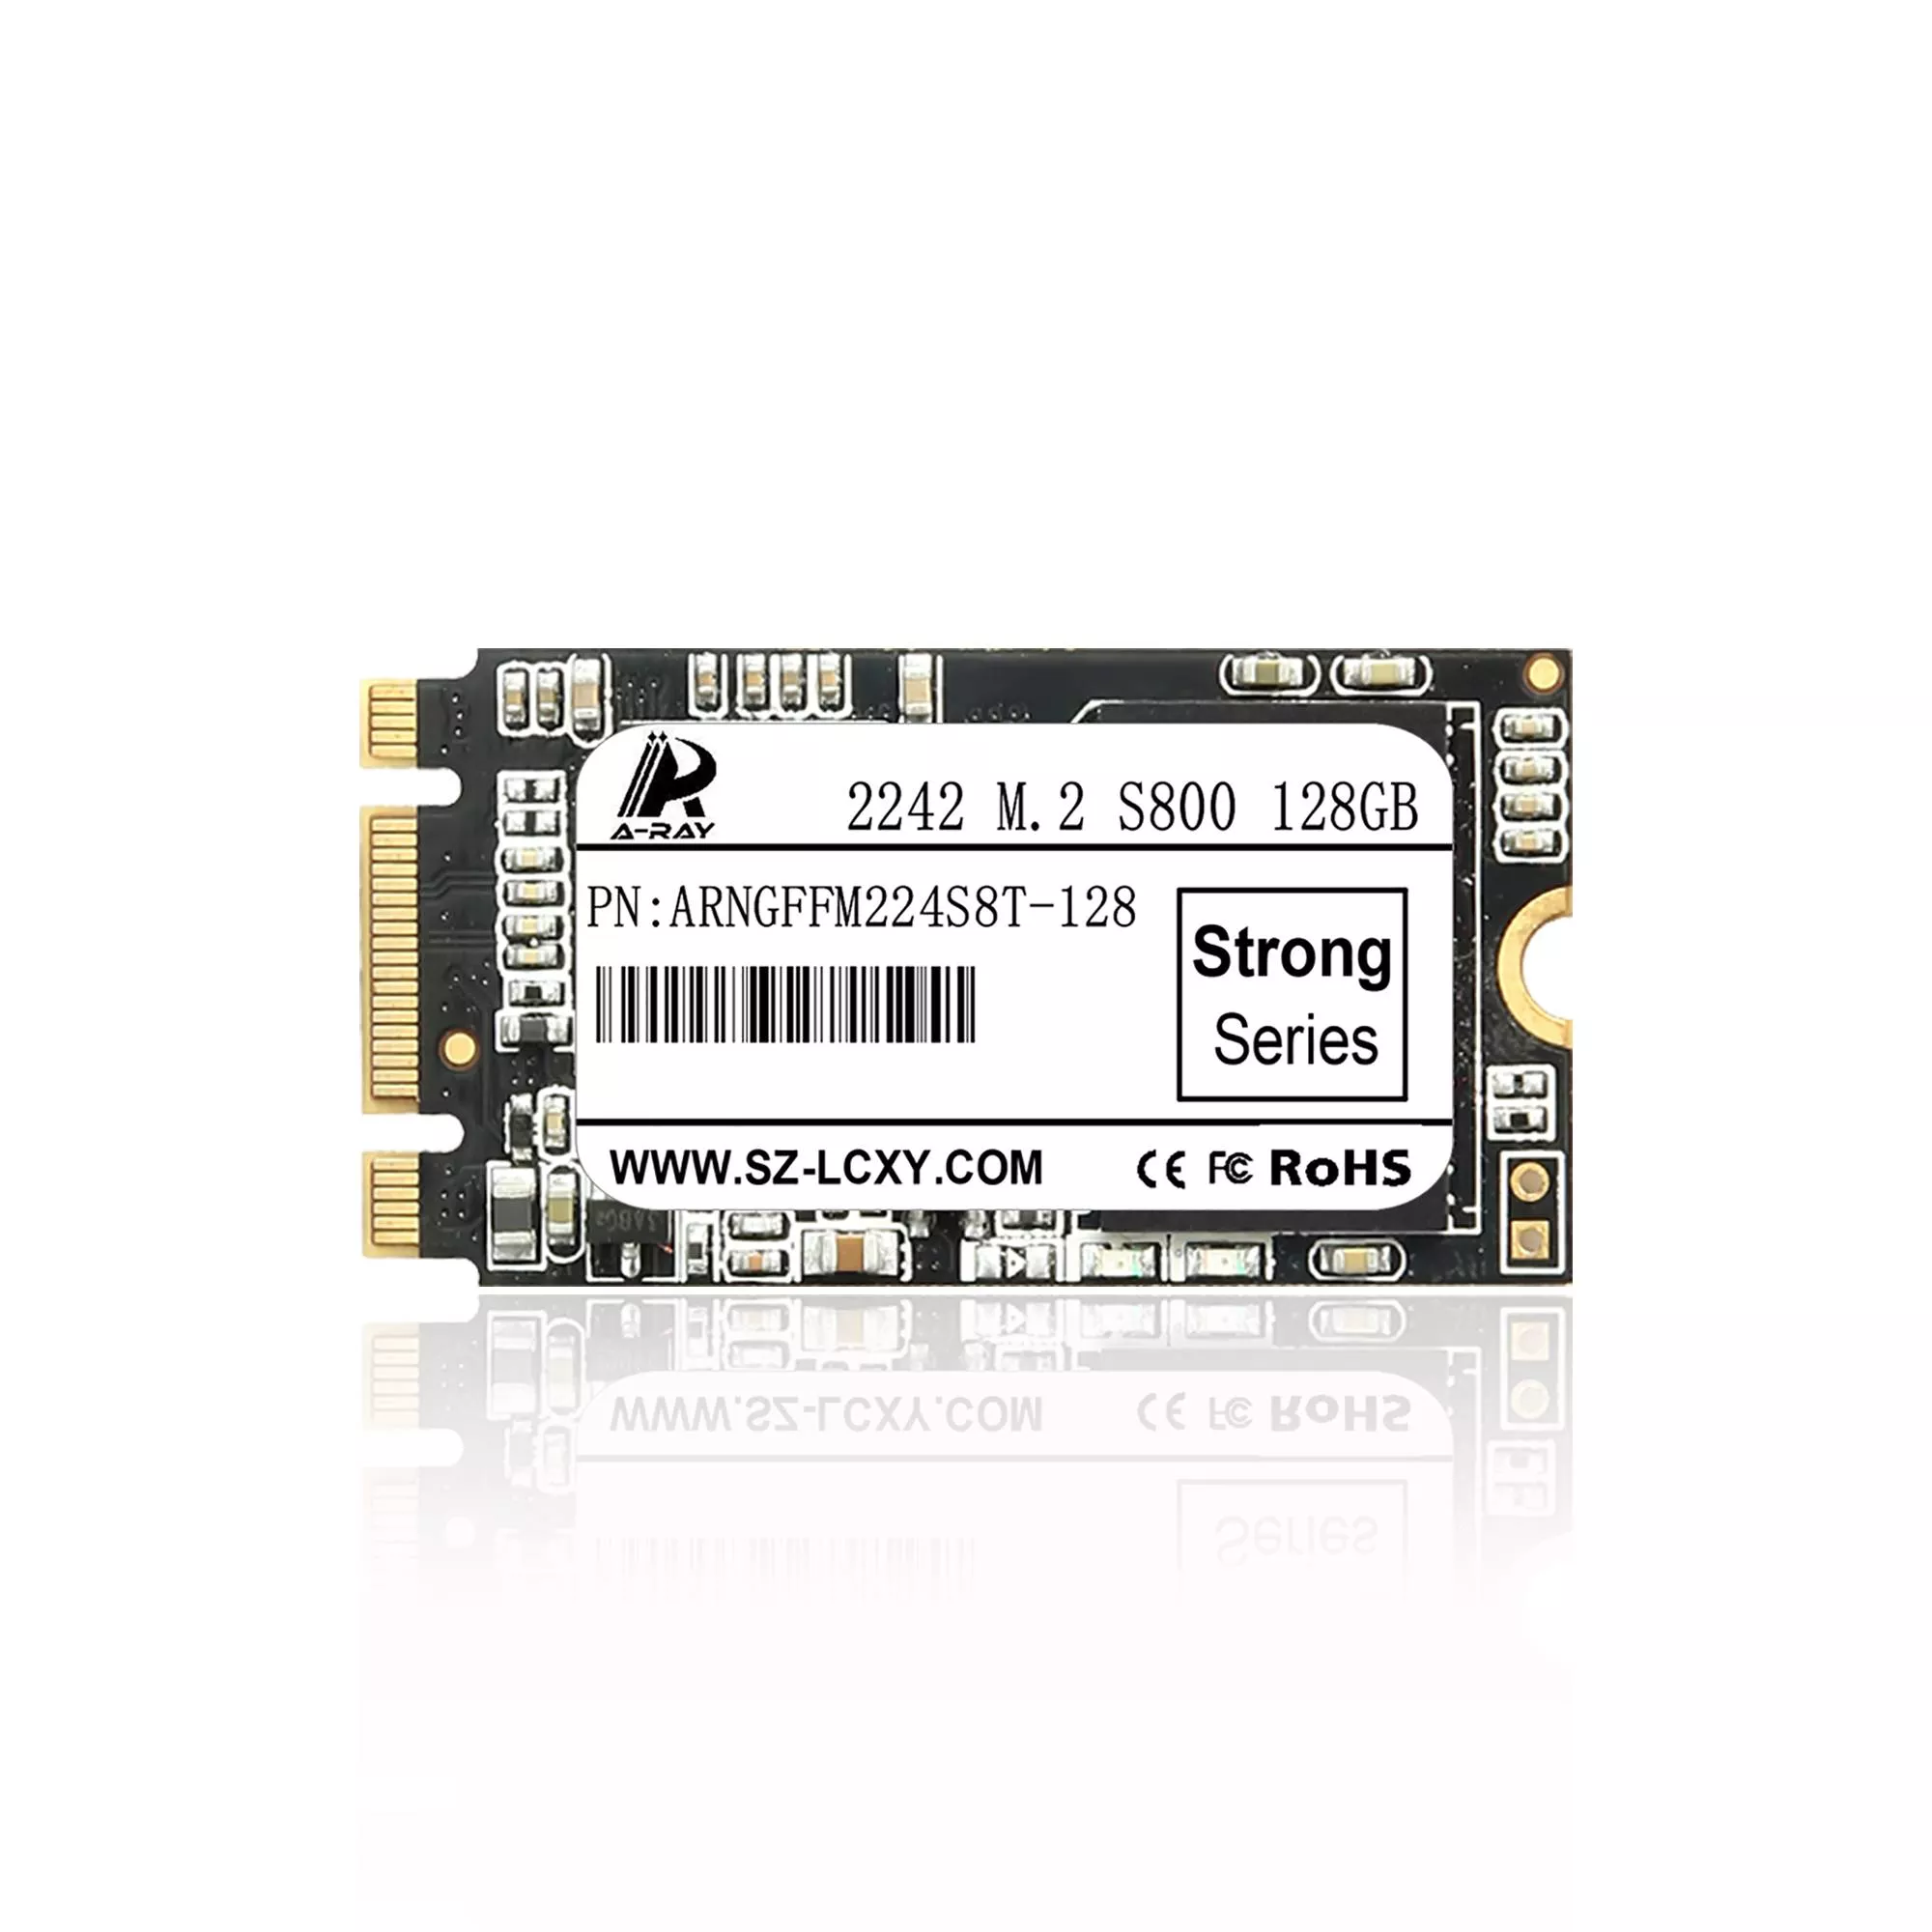 Ổ cứng SSD 128GB A-RAY 2242 NGFF M.2 6GBps S800 Strong Series